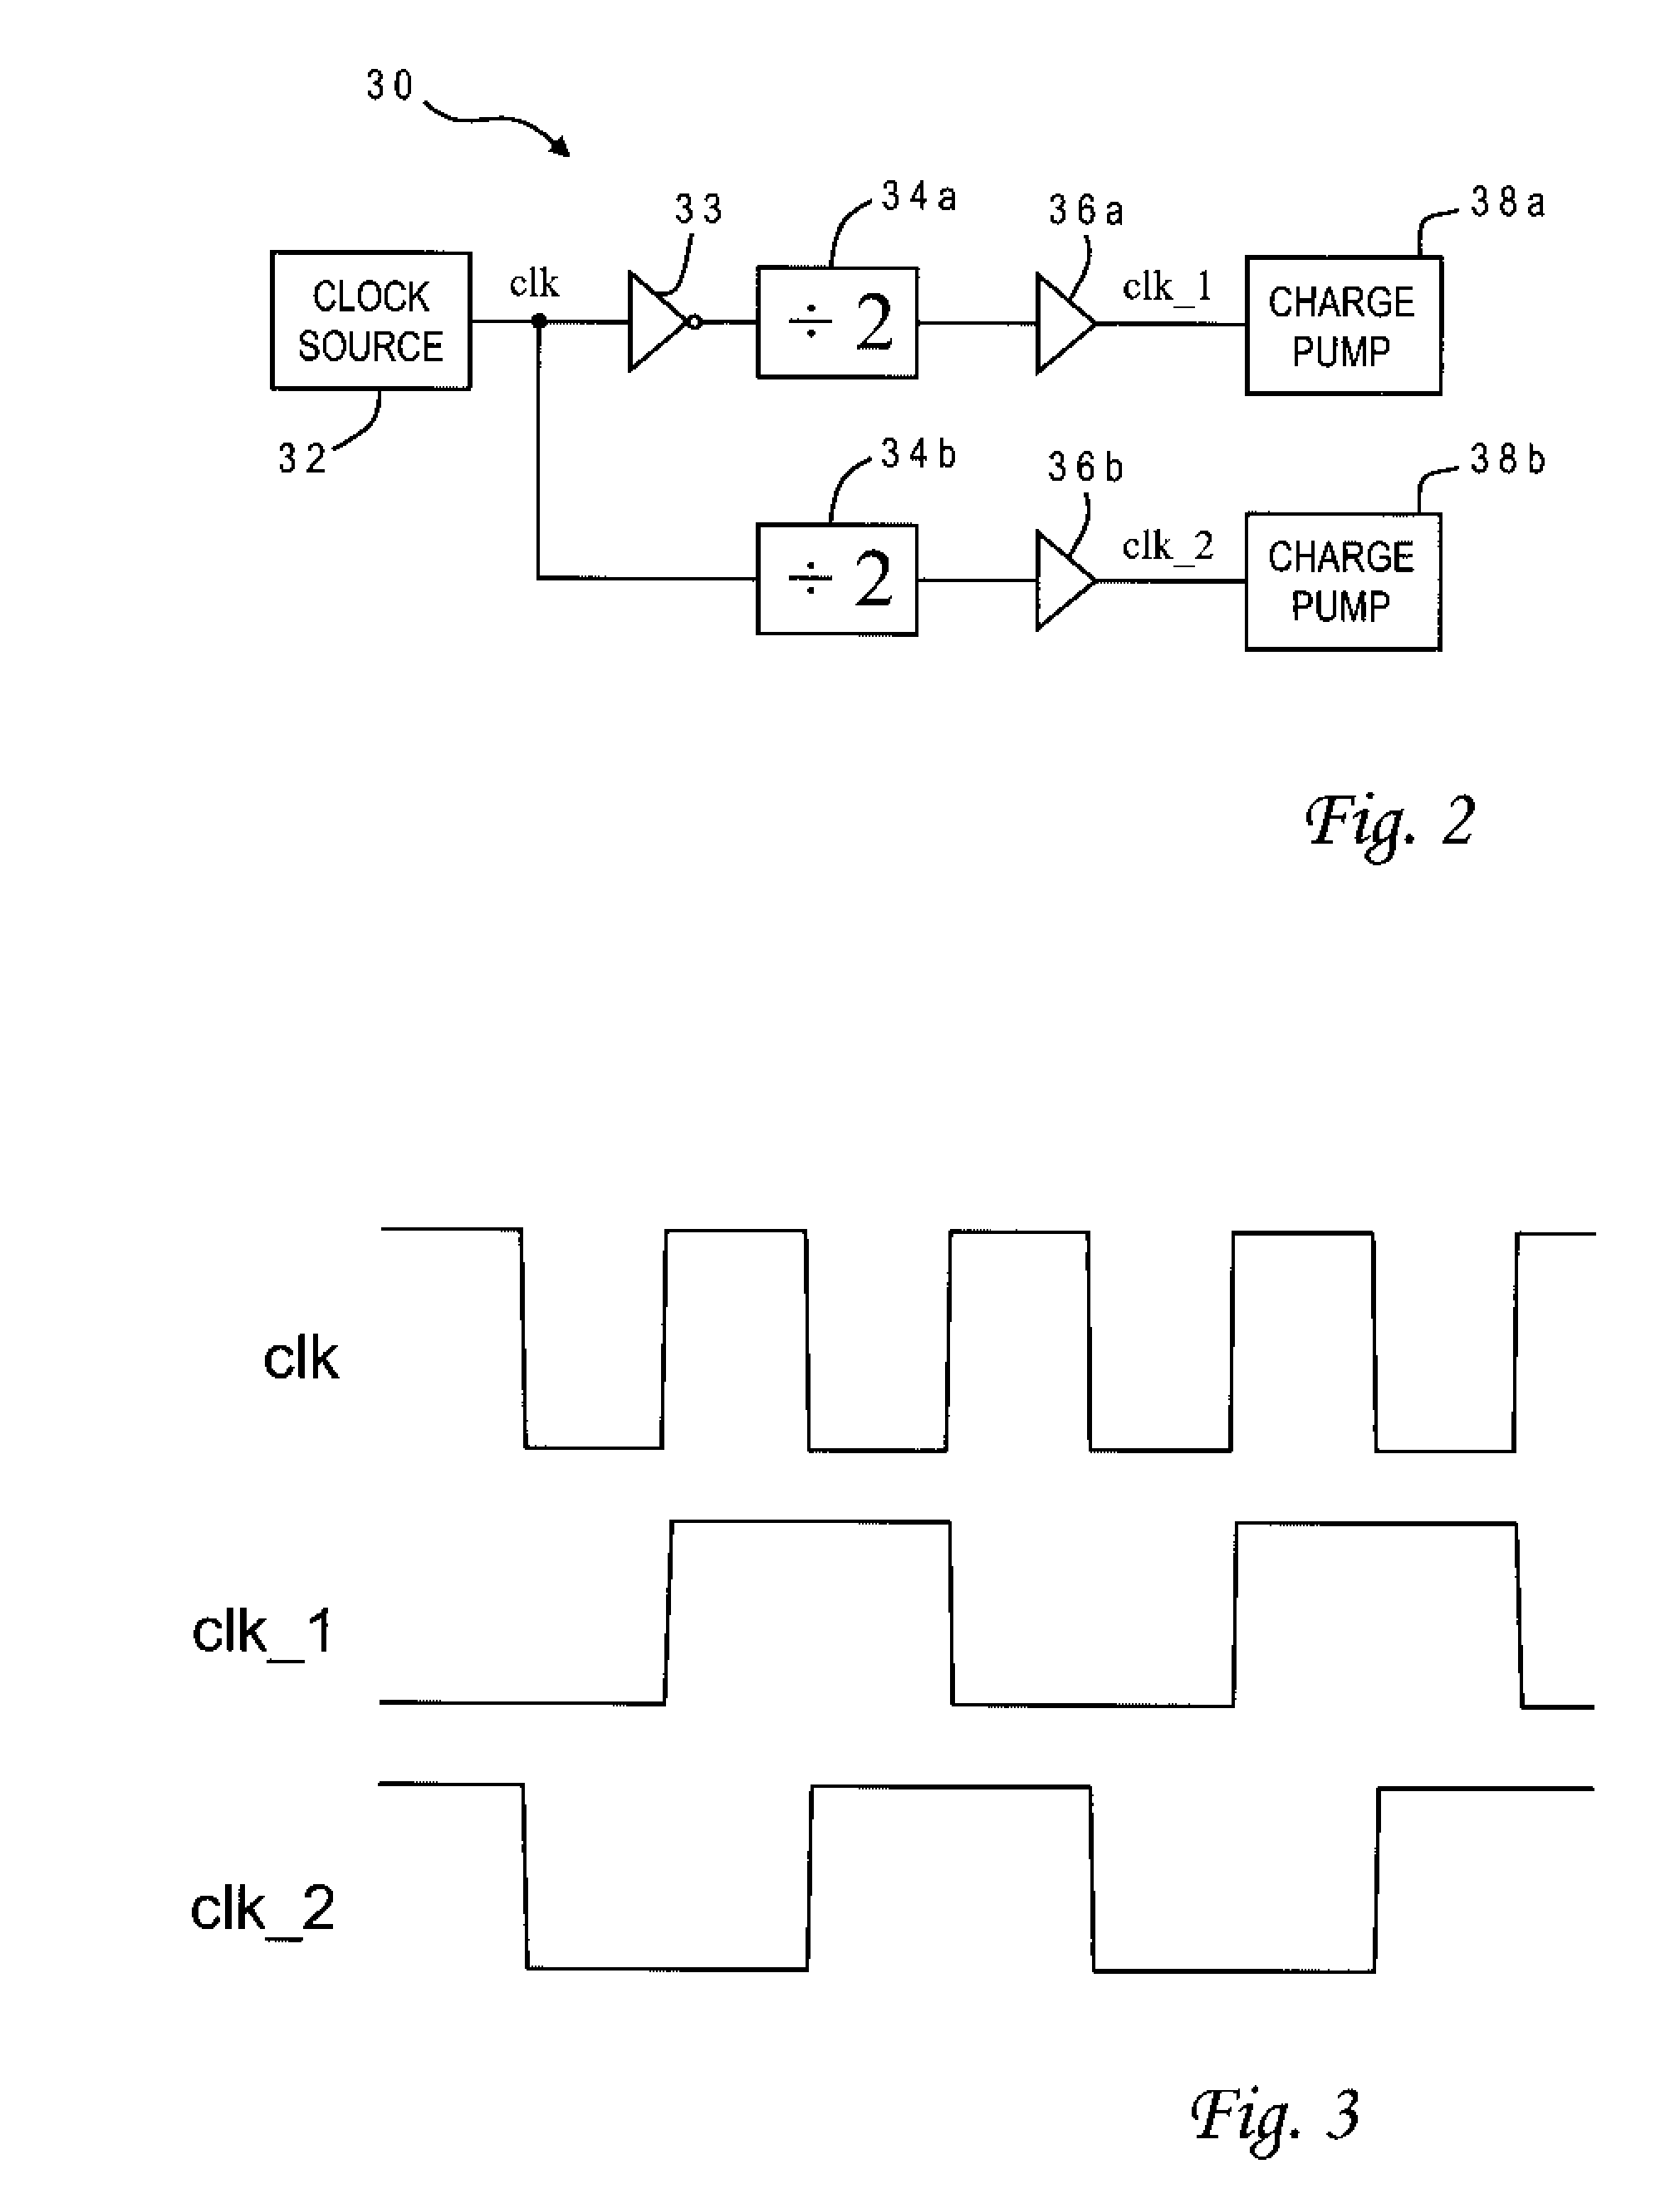 Peak Power Reduction Methods in Distributed Charge Pump Systems